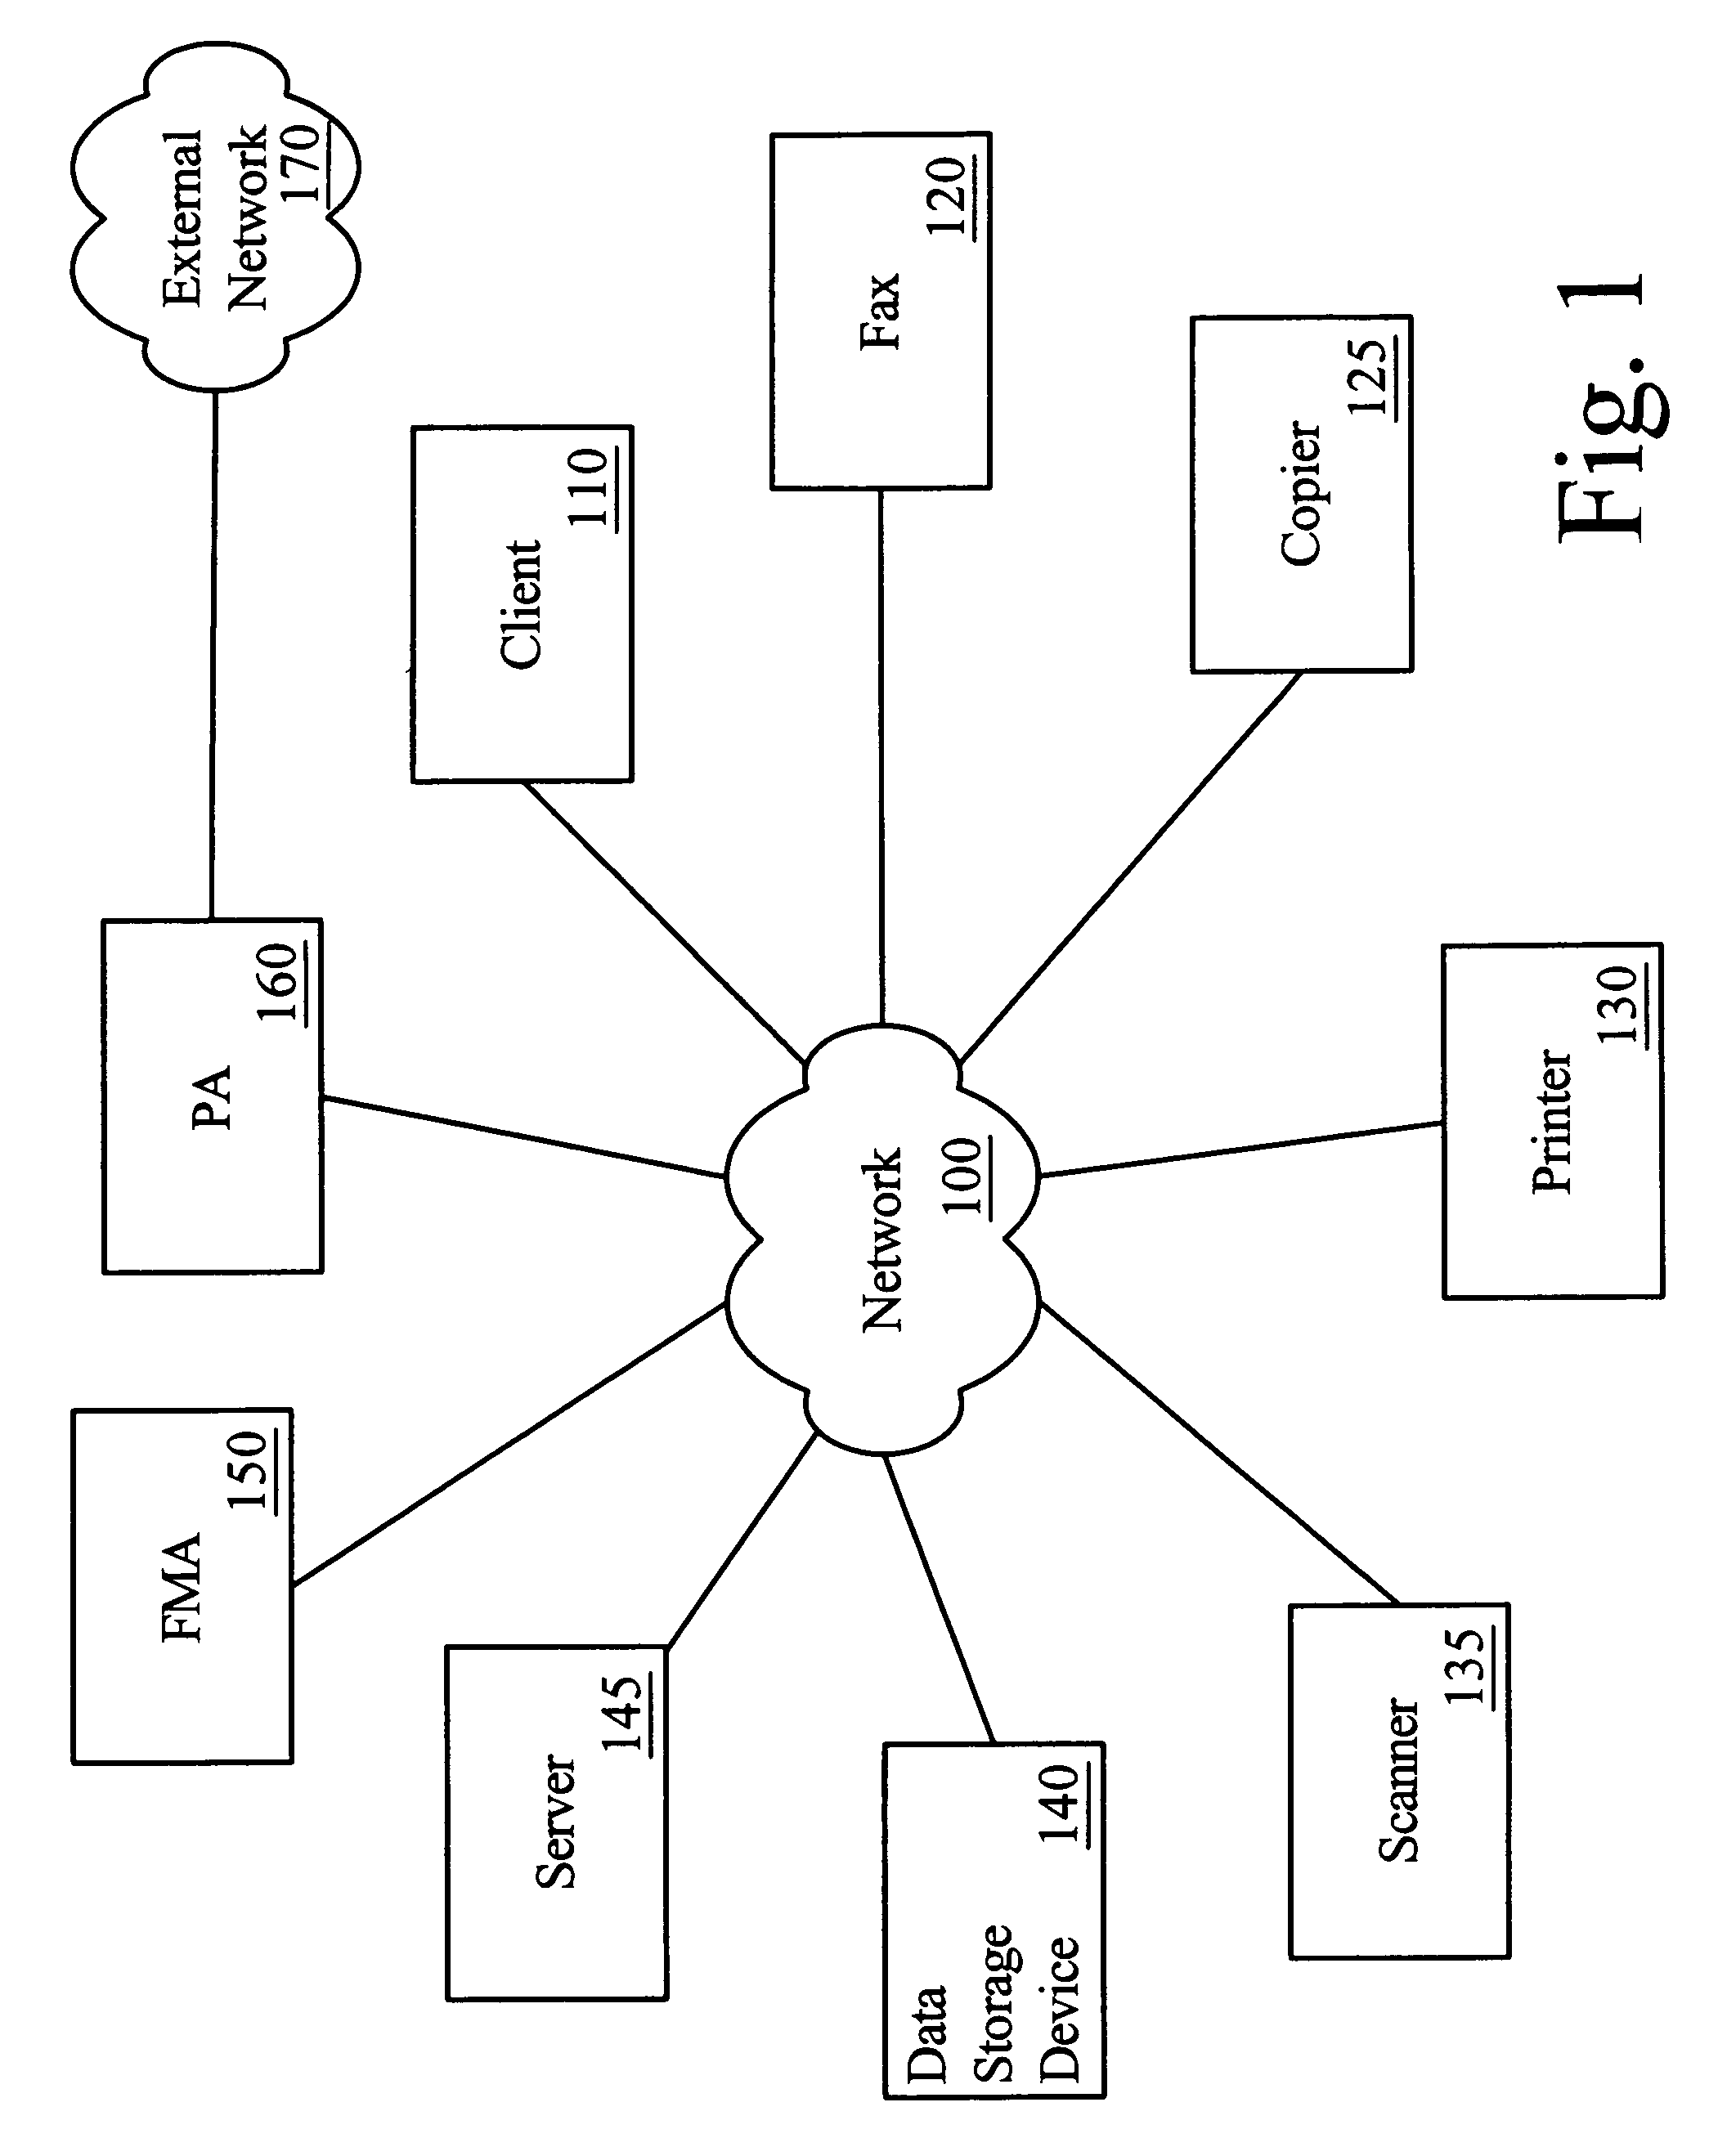 Methods and apparatuses for searching both external public documents and internal private documents in response to single search request